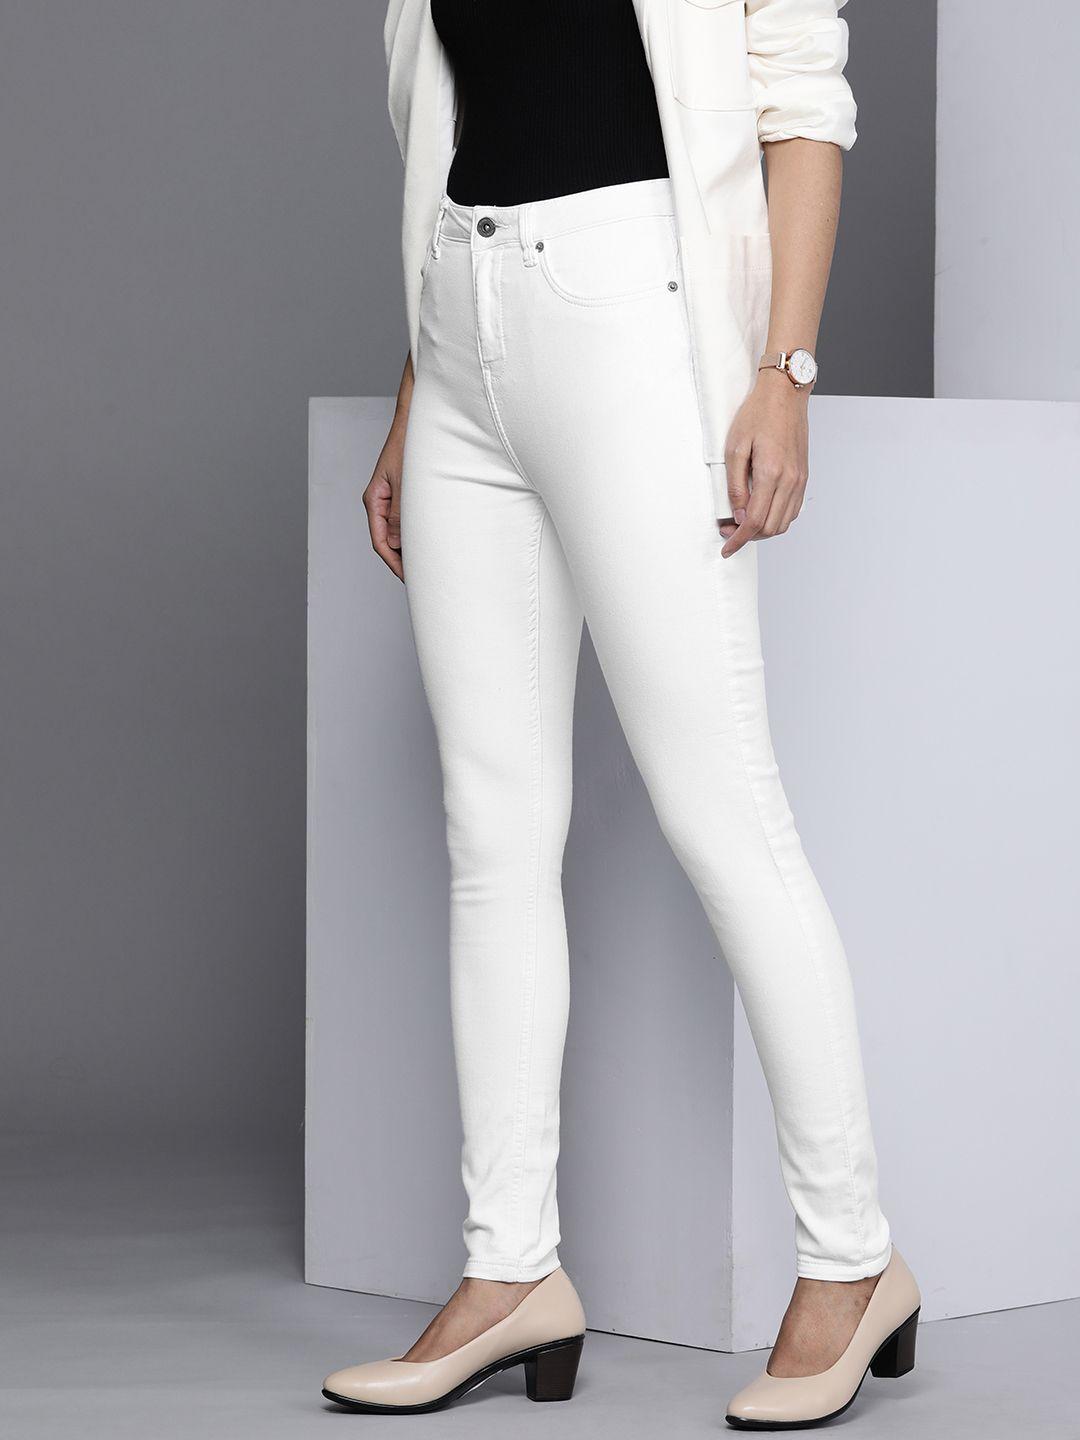 kenneth-cole-flux-women-off-white-skinny-fit-high-rise-stretchable-denim-jeans